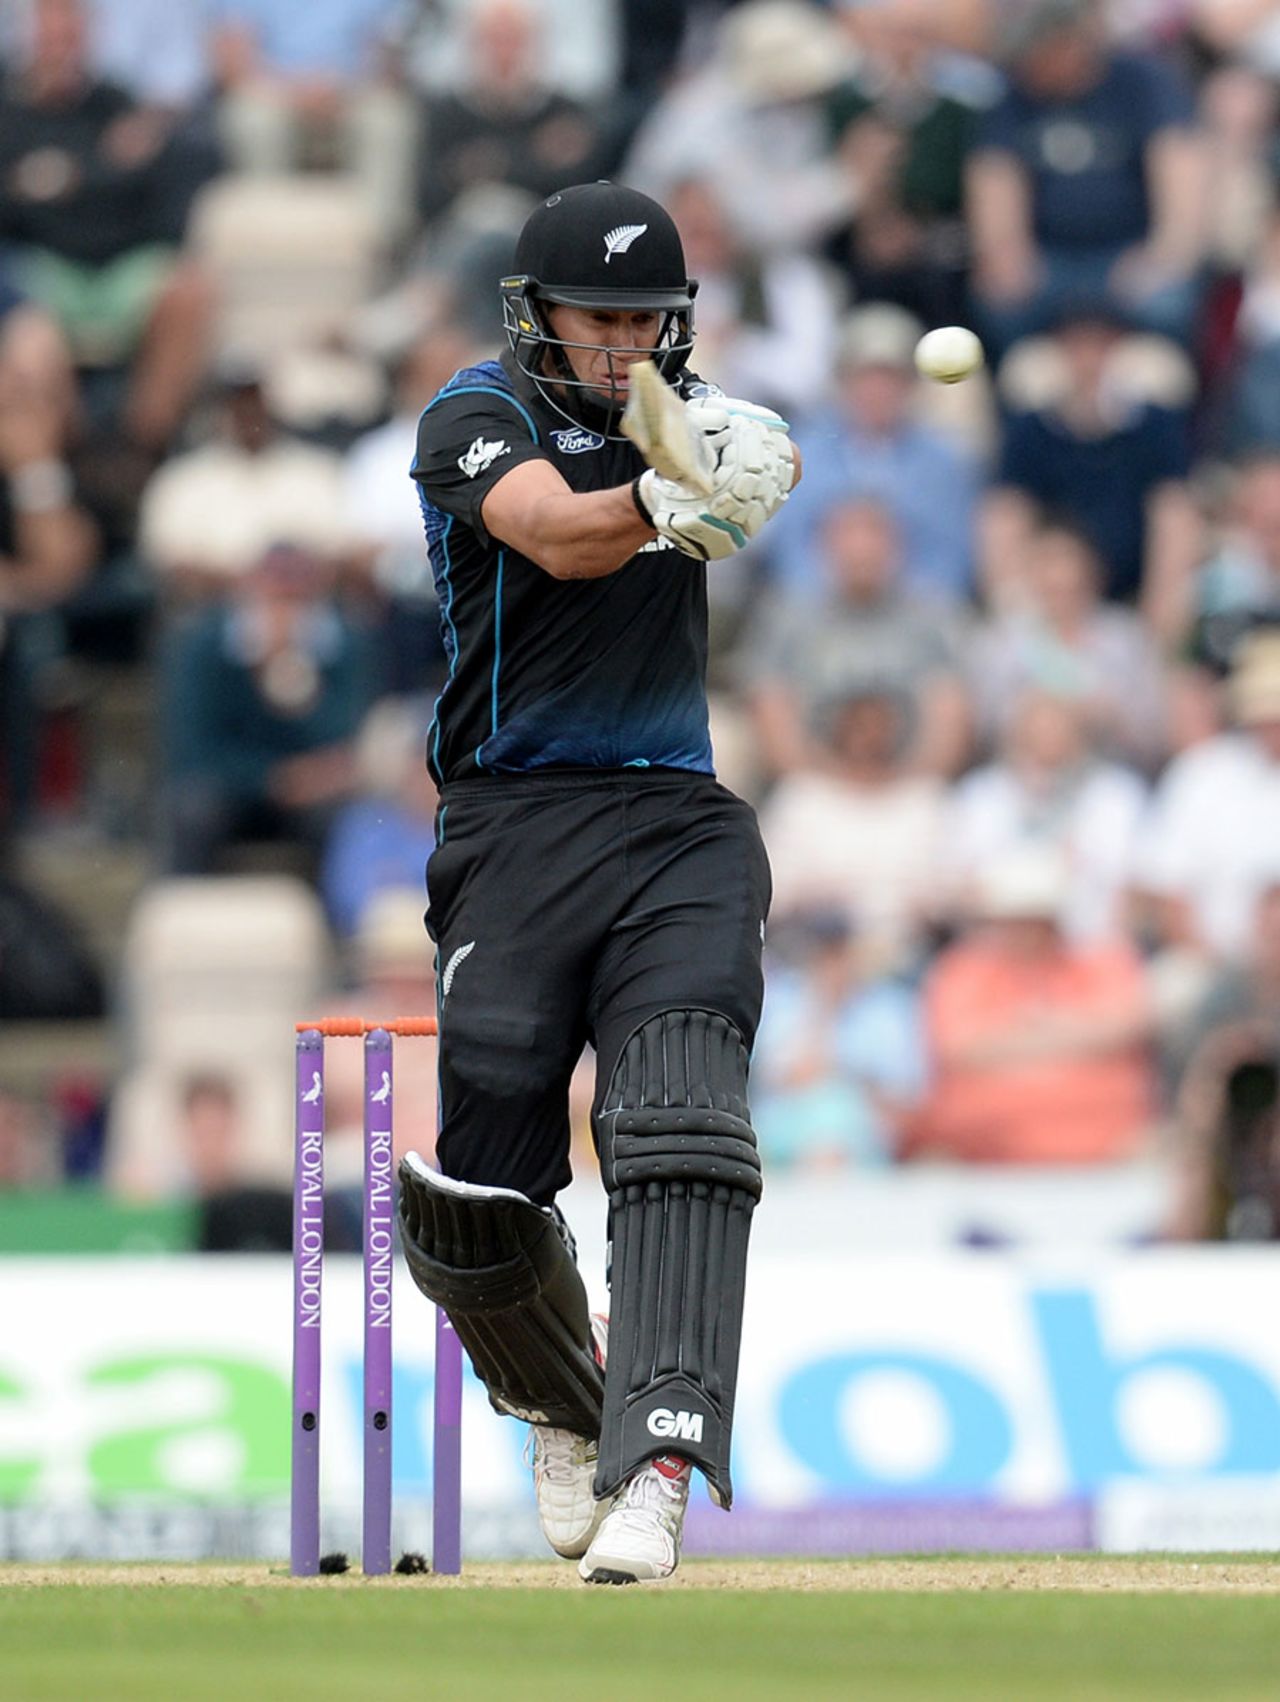 Ross Taylor was in the runs again, England v New Zealand, 3rd ODI, Ageas Bowl, June 14, 2015